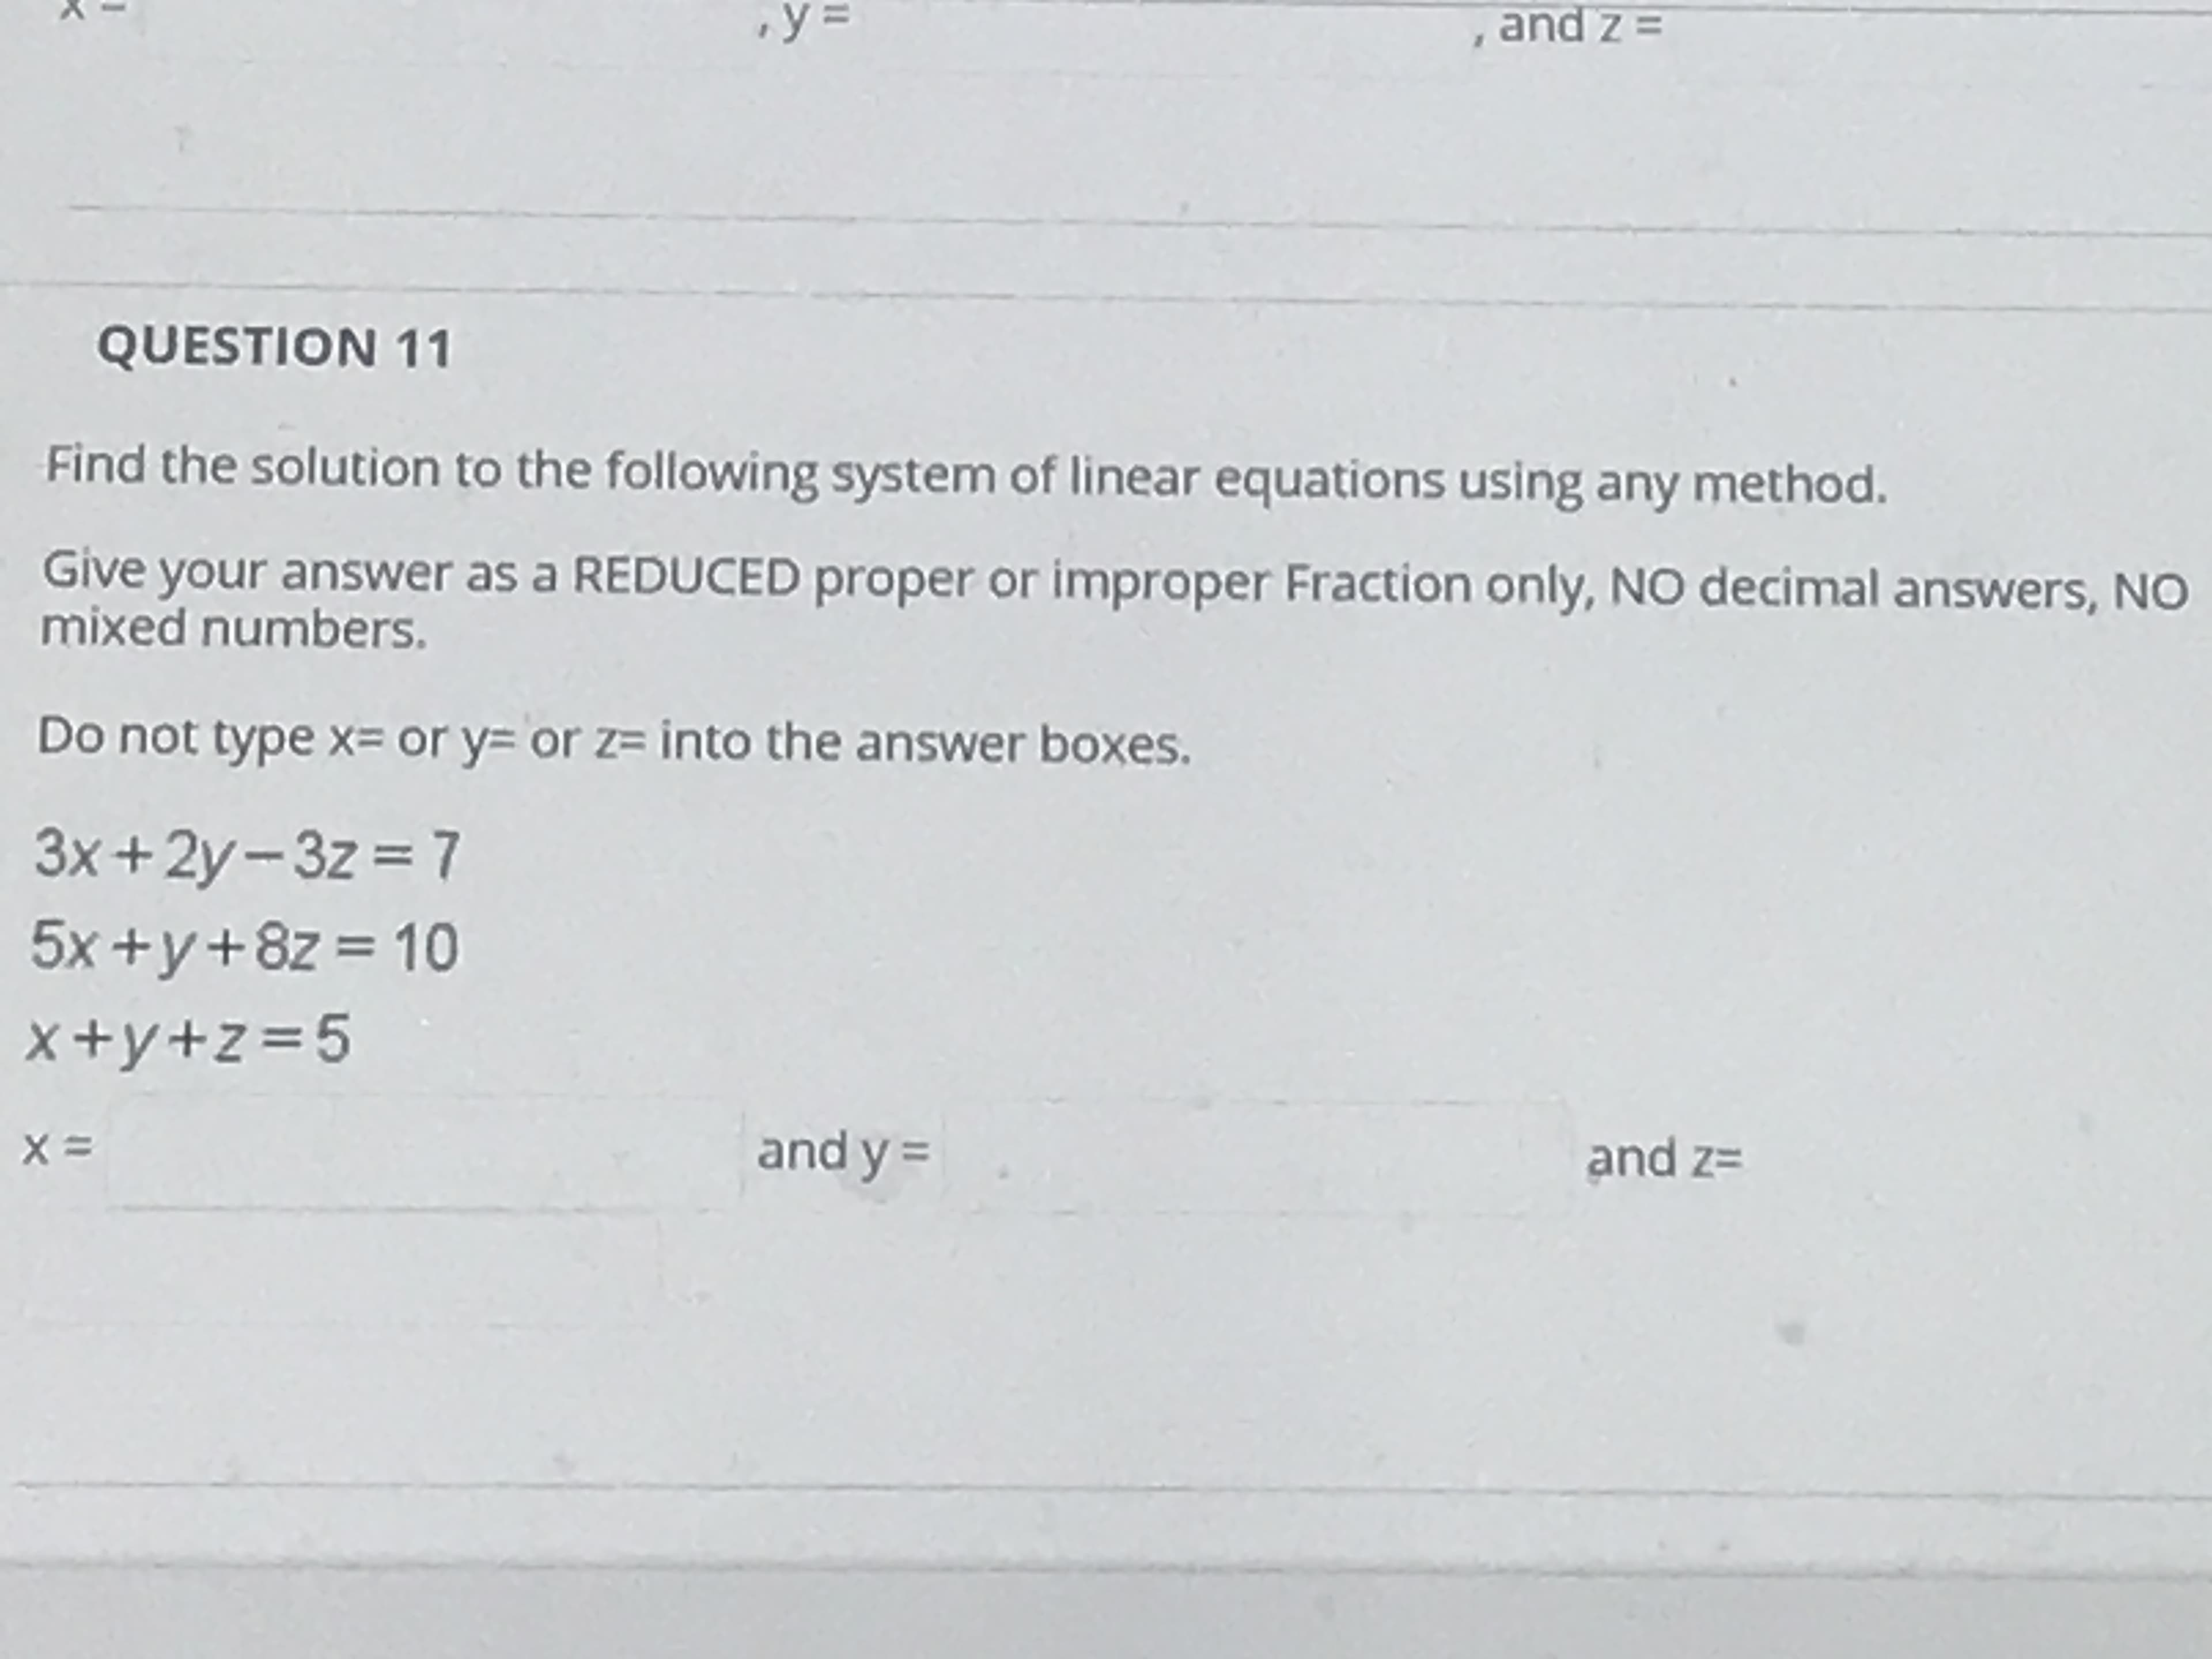 QUESTION 11
Find the solution to the following system of linear equations using any method.
Give your answer as a REDUCED proper or improper Fraction only, NO decimal answers, NO
mixed numbers.
Do not type x= or y= or z= into the answer boxes.
3x +2y-3z = 7
5x +y+8z = 10
x+y+z=5
and y =
and z=
